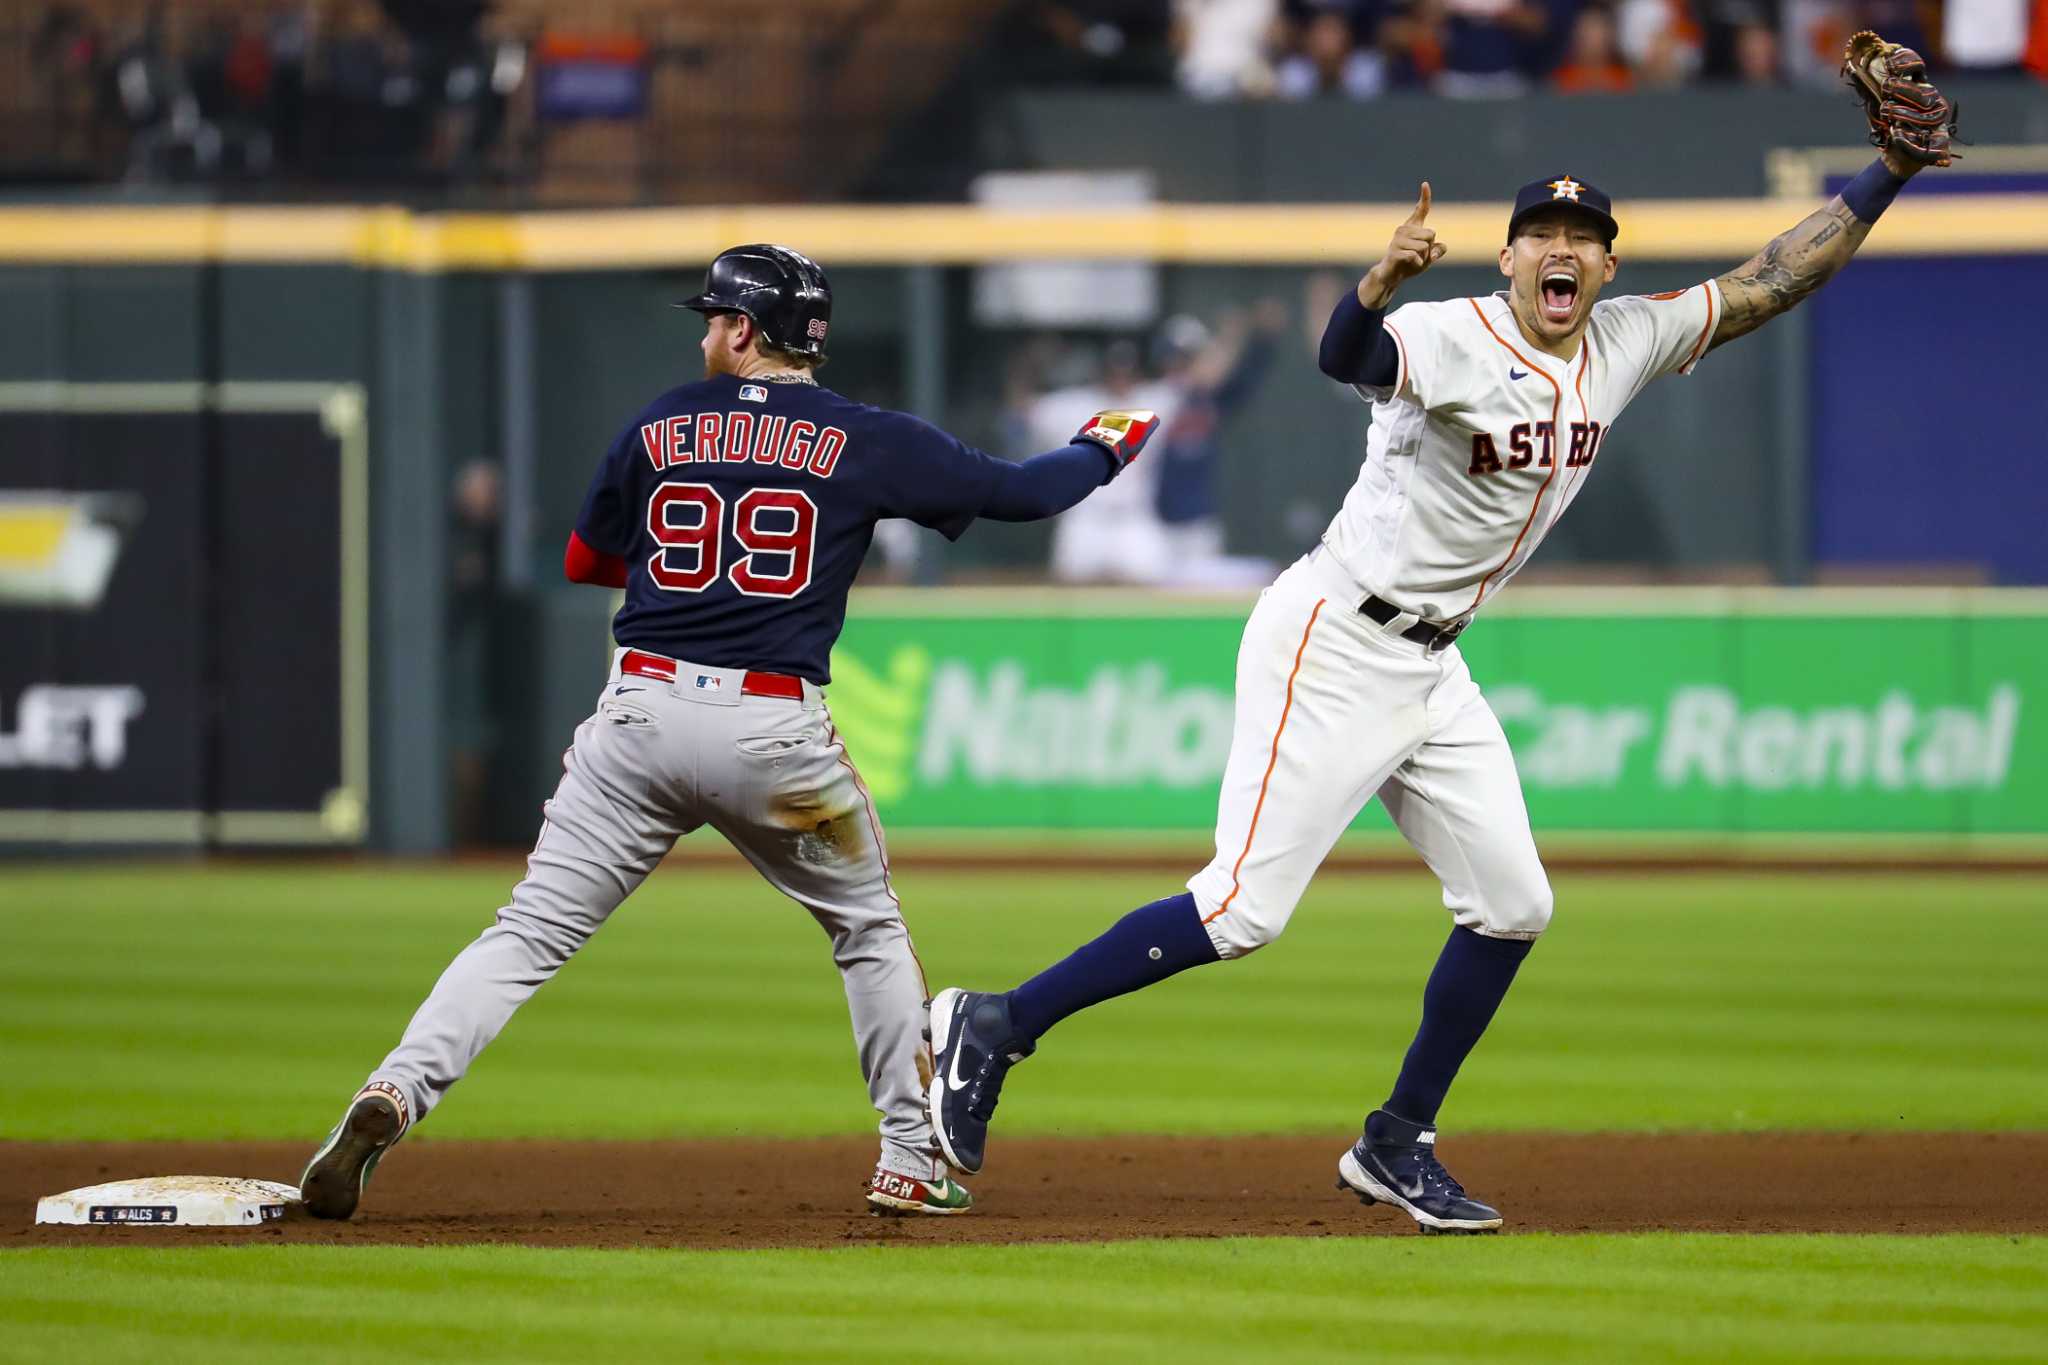 Key storylines for ALCS Game 6